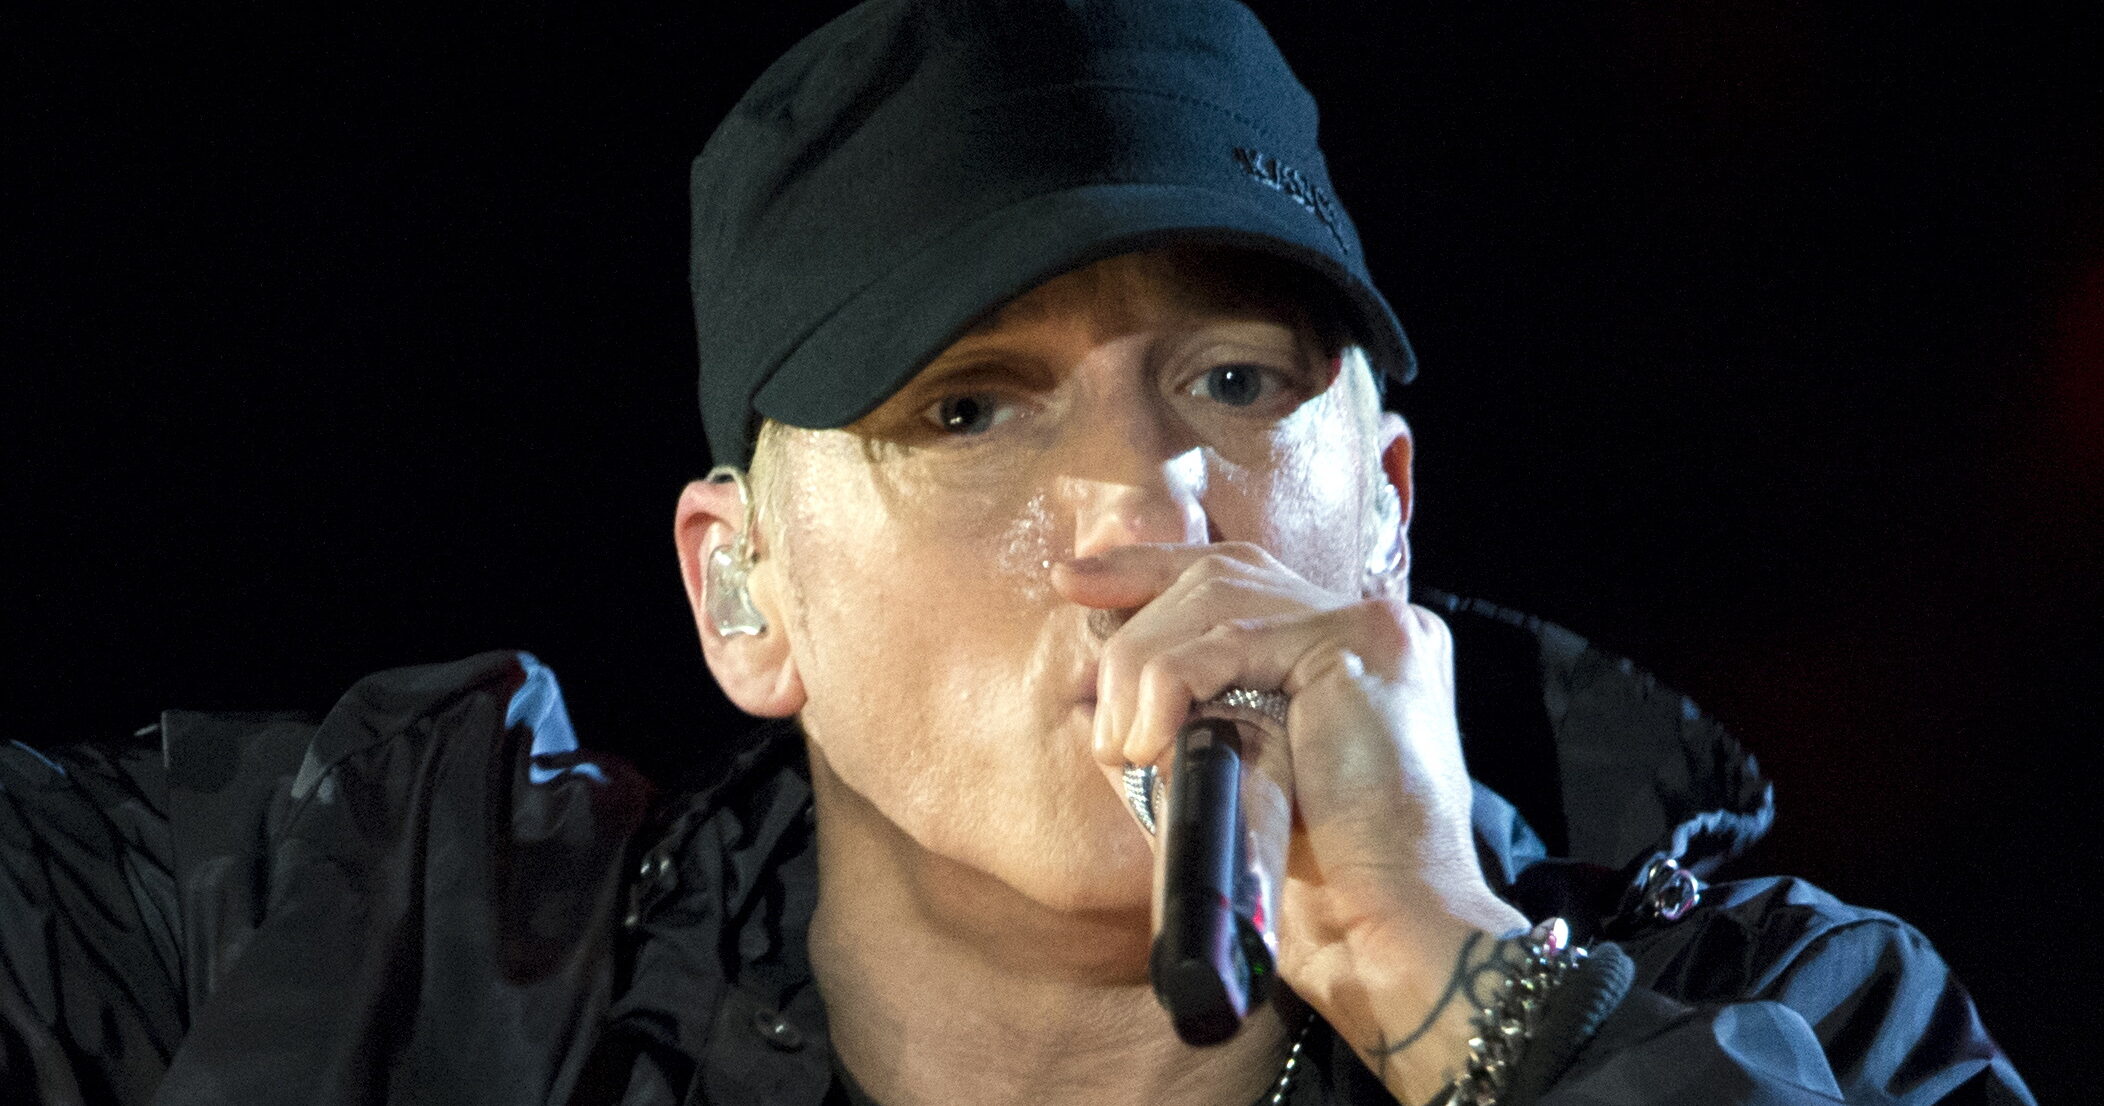 Think White Guys Can't Rap? Think Again. His Name Is Eminem, And He's Got A Beat That Just Might Make You